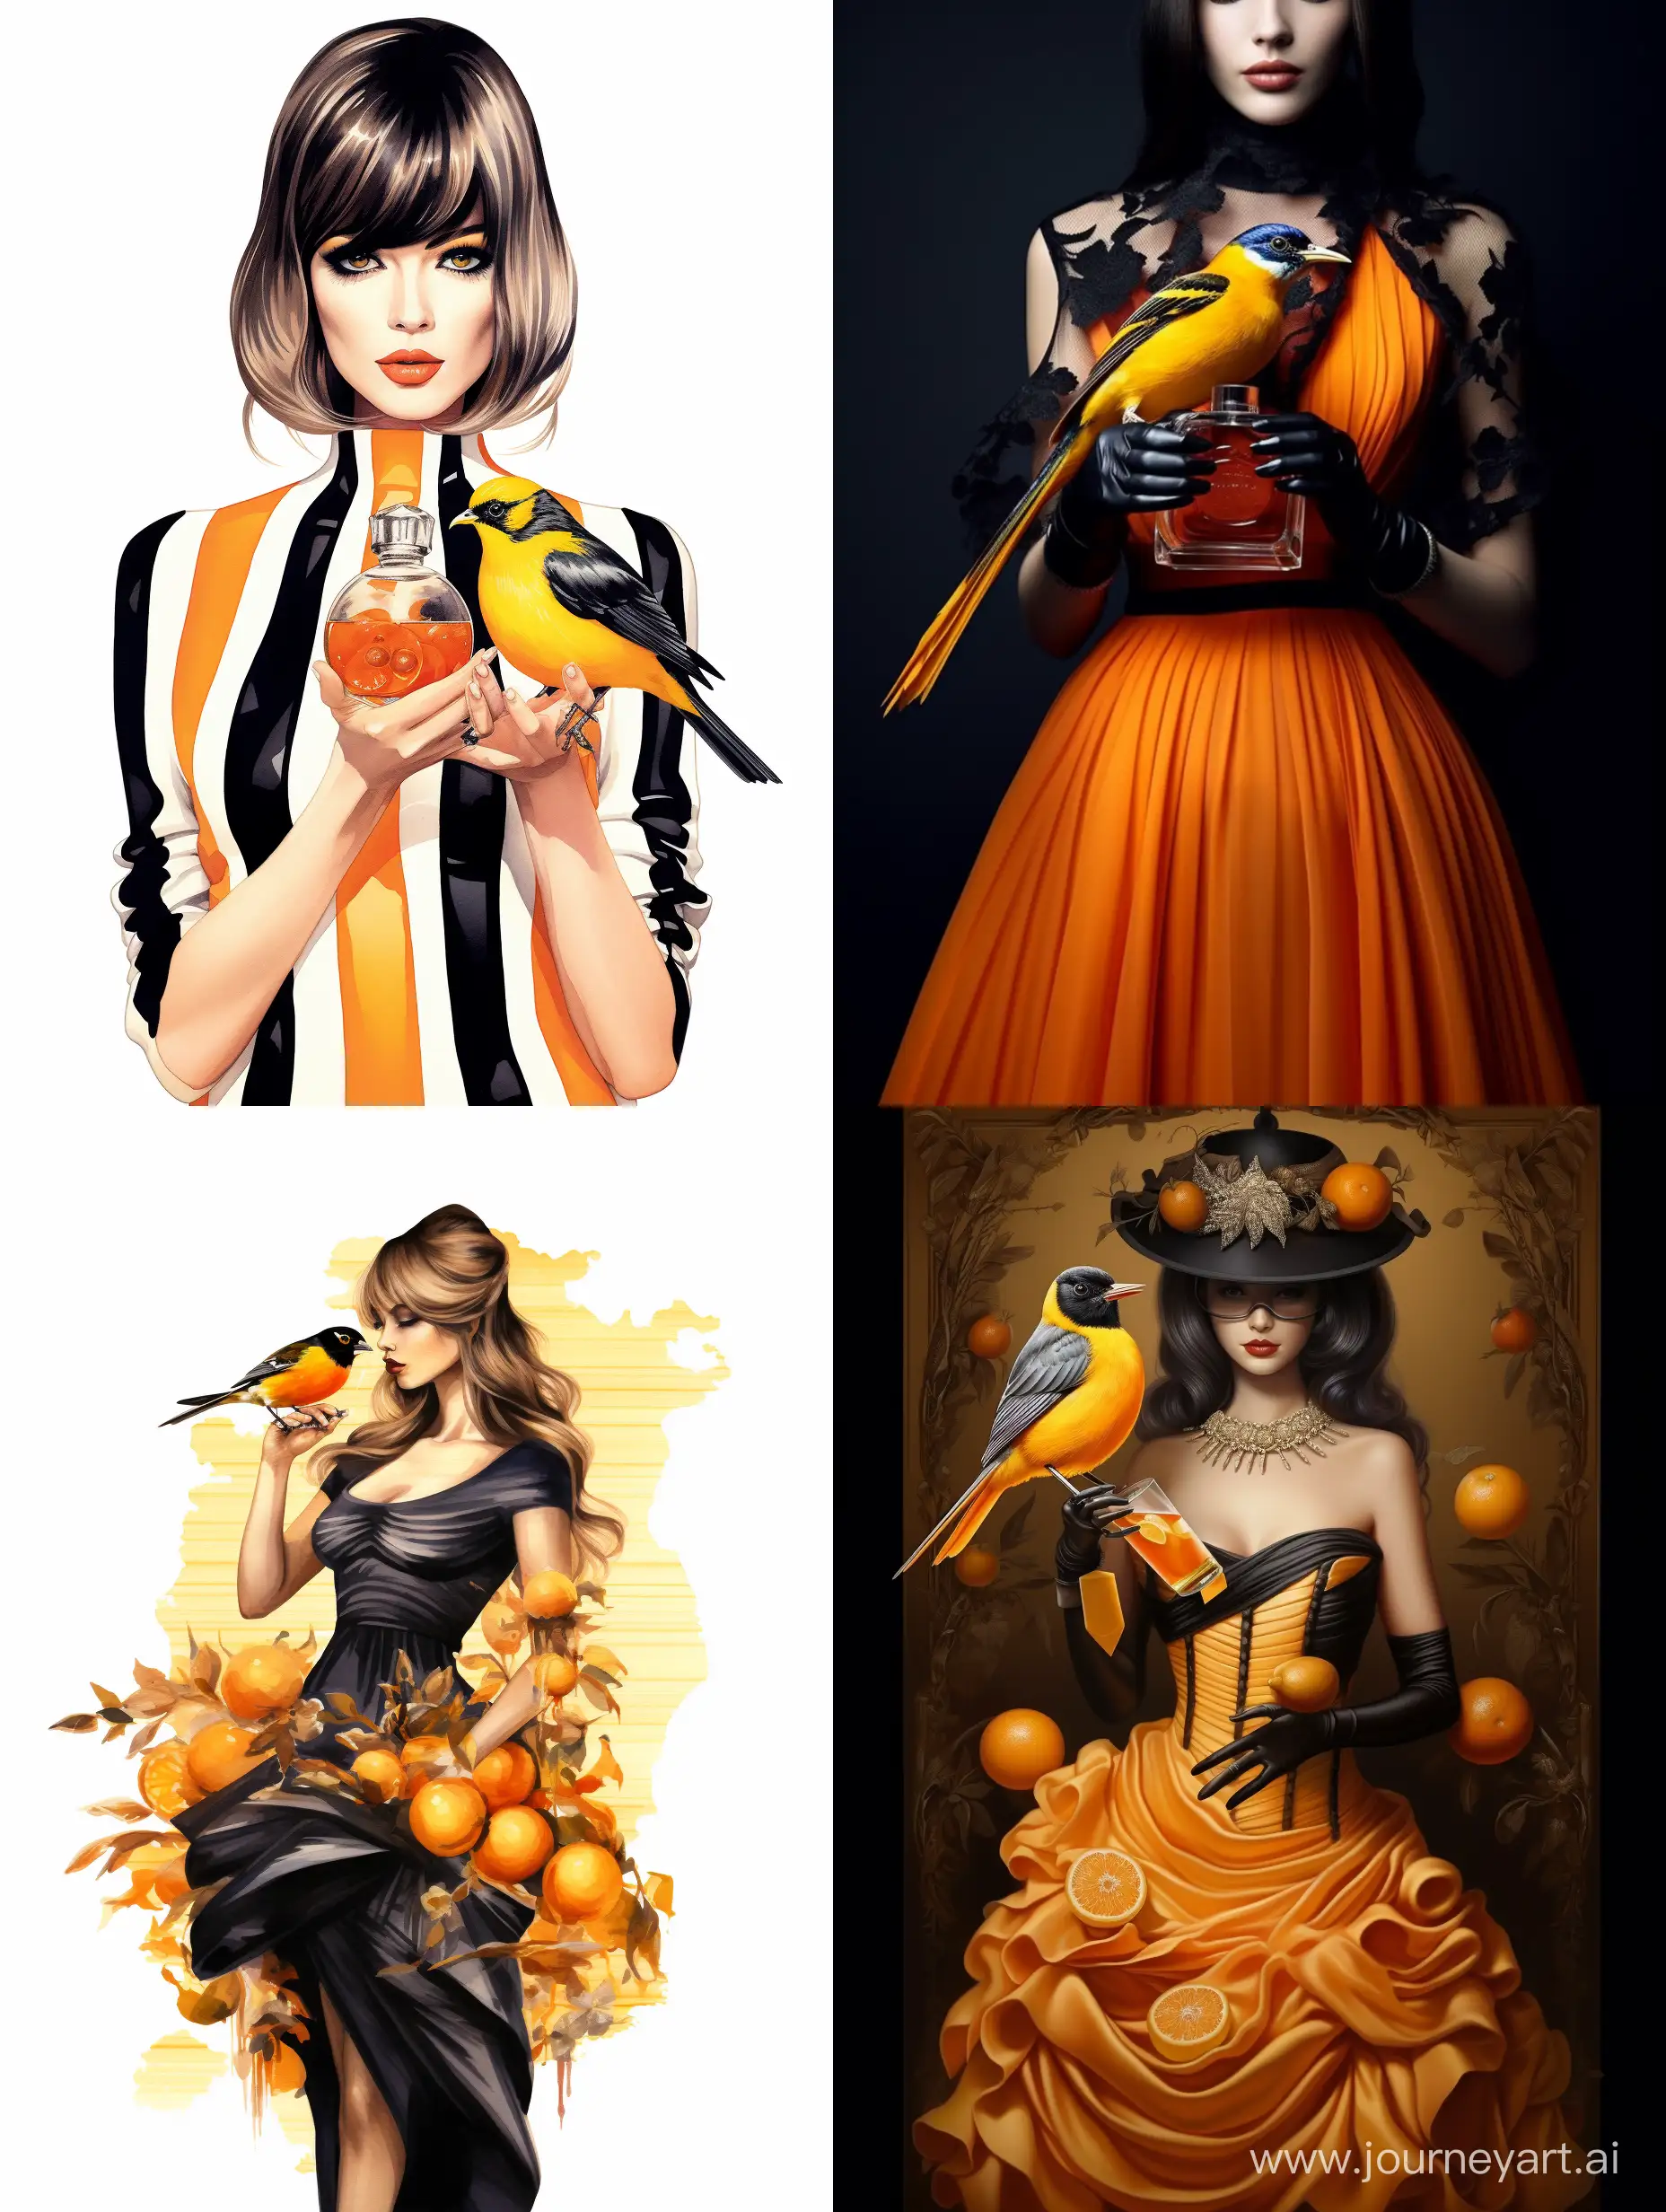 Stylish-Baltimore-Oriole-Bird-Posing-with-Exquisite-Perfume-Bottle